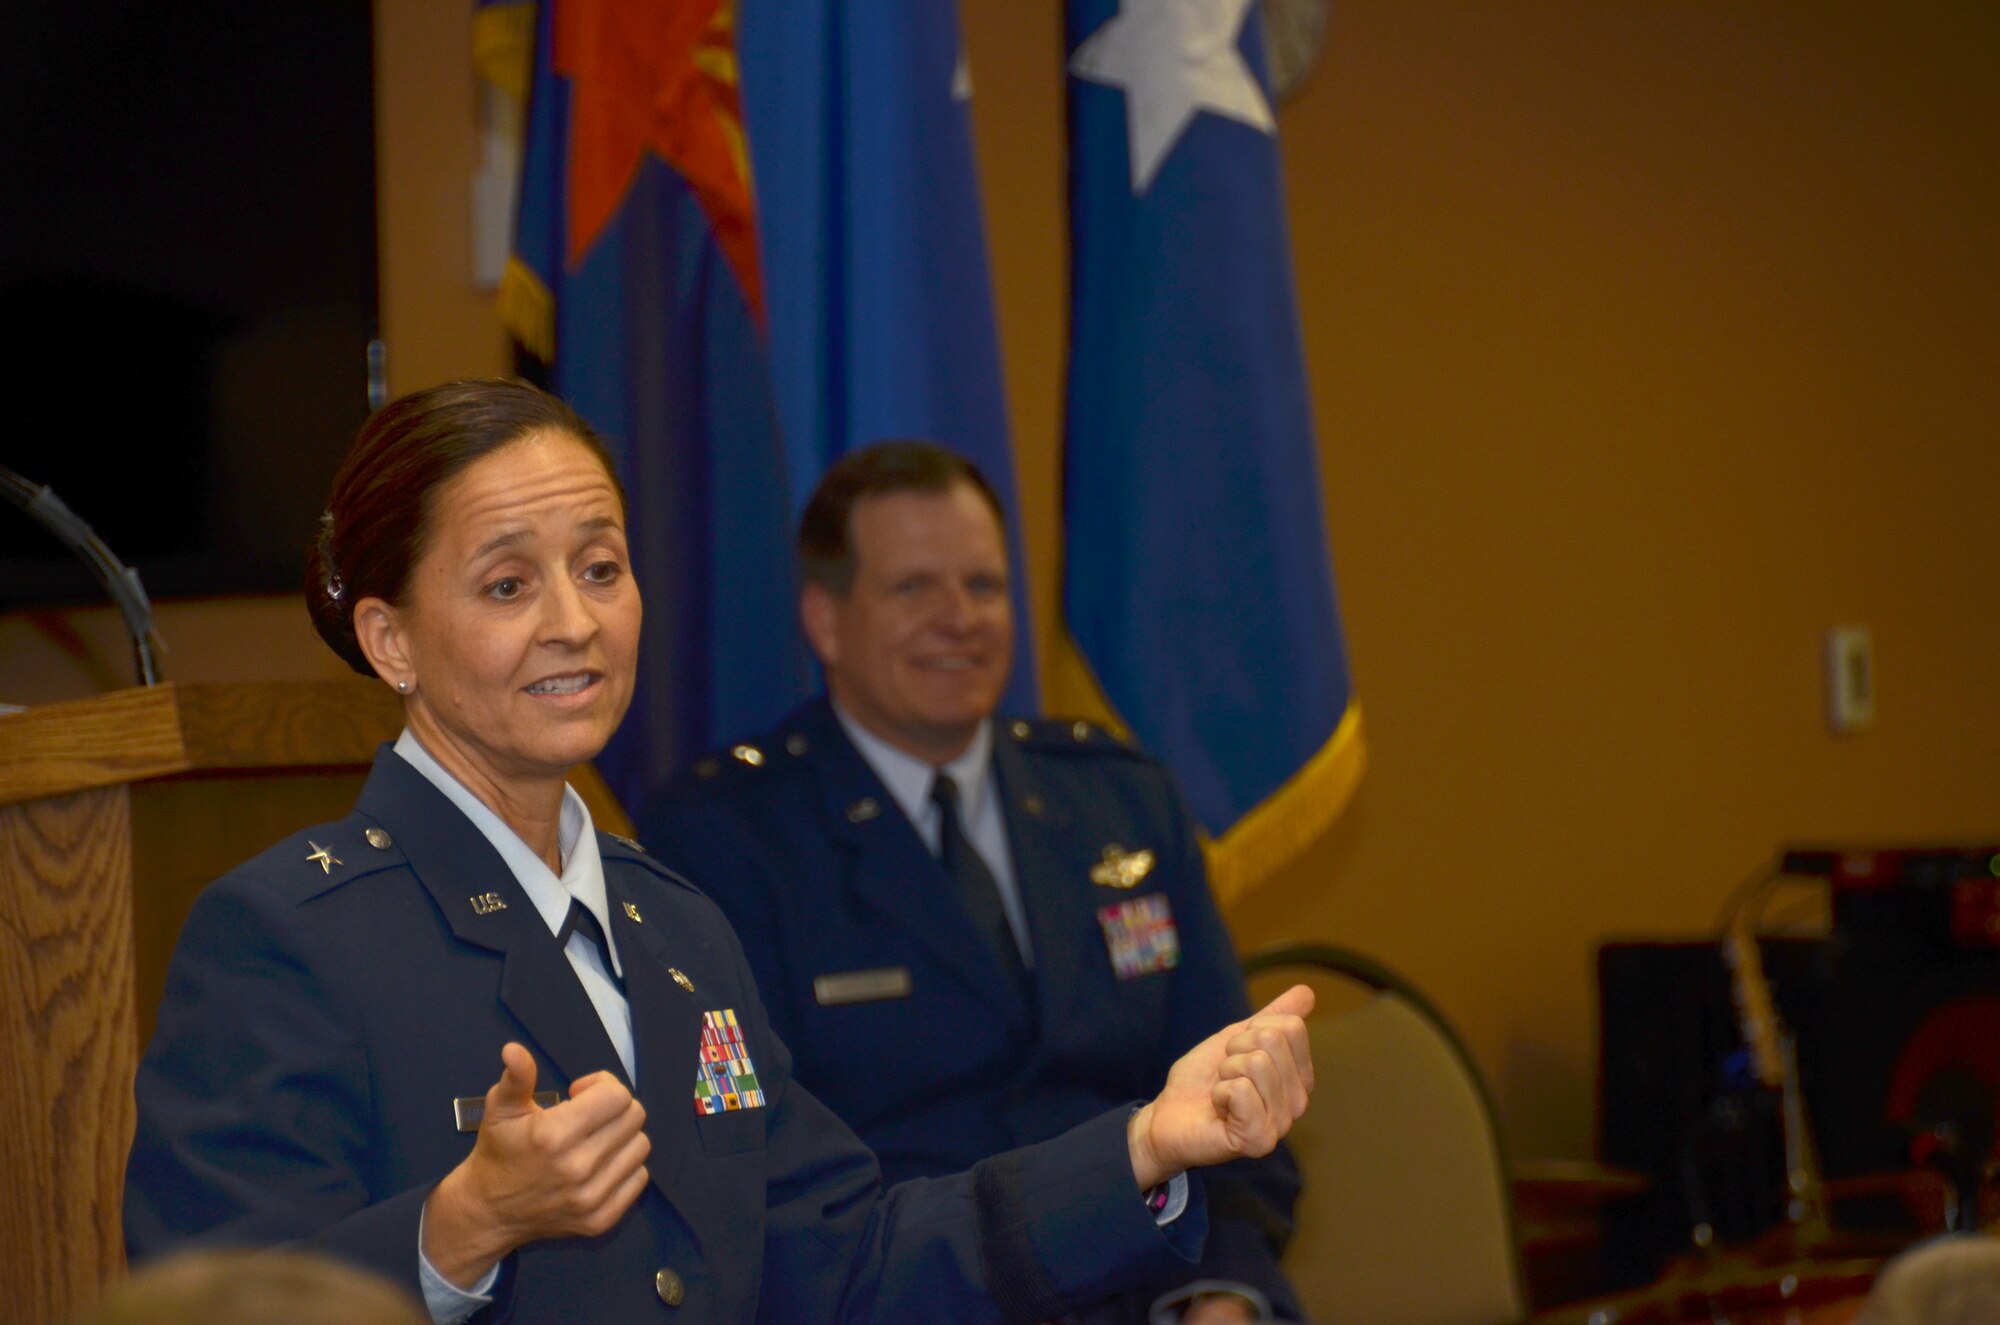 U.S. Air Force Brig. Gen. Kerry L. Muehlenbeck, Arizona Army and Air Guard Joint Operations officer,  laughs with the audience during her promotion ceremony June 7, 2014 at the 161st Air Refueling Wing, Phoenix. “The military is a big part of me – but it’s not all of me. I’ve tried to balance all aspects of my life over the years,” said Muehlenbeck. (U.S. Air National Guard photo by Senior Airman Rashaunda Williams/Released)